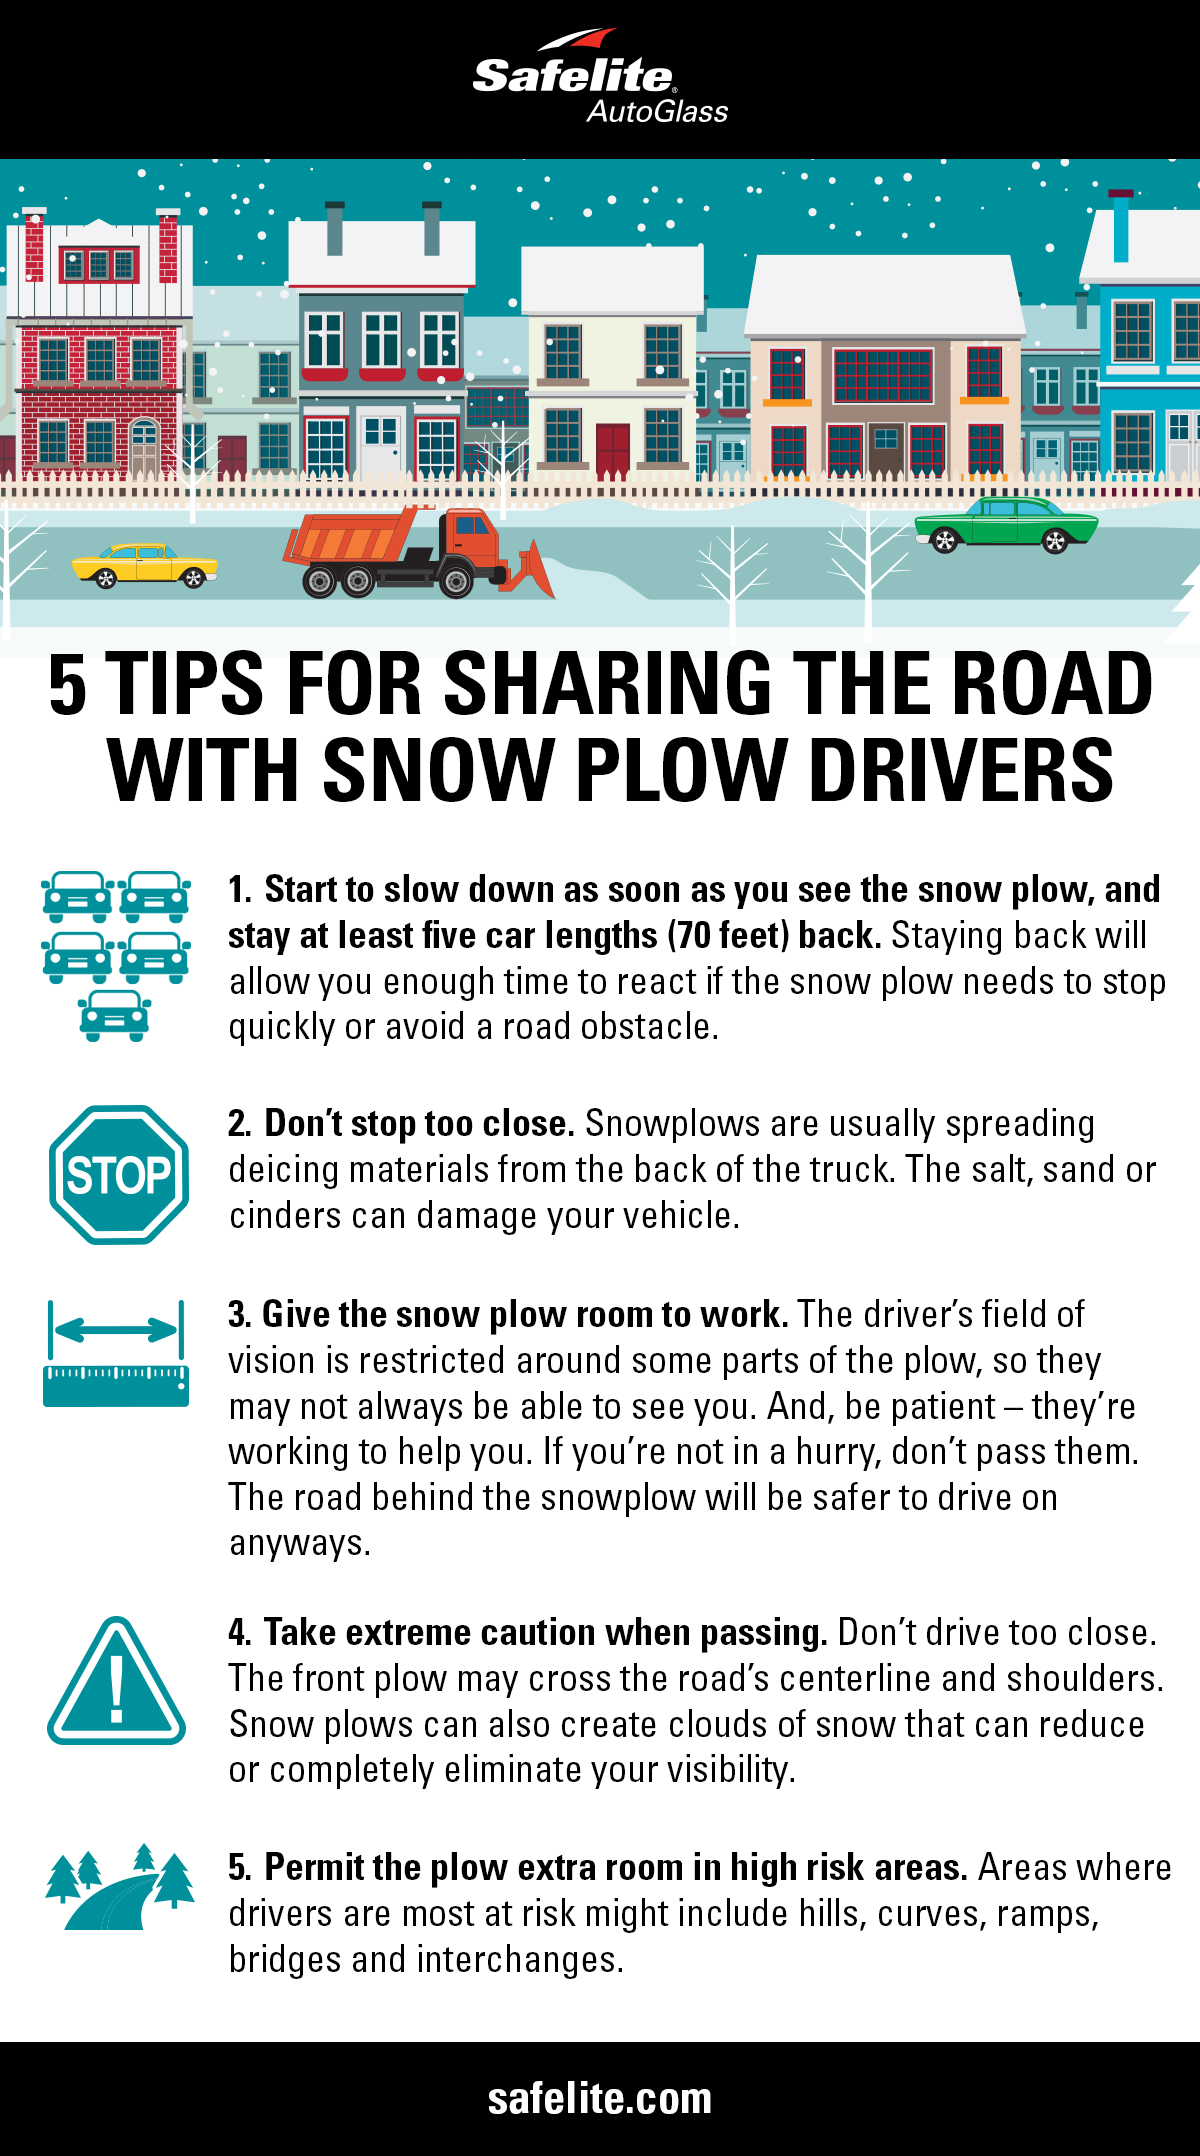 Safelite wants you to drive safely on winter roads. Here are five tips to stay safe when sharing the road with snow plows.